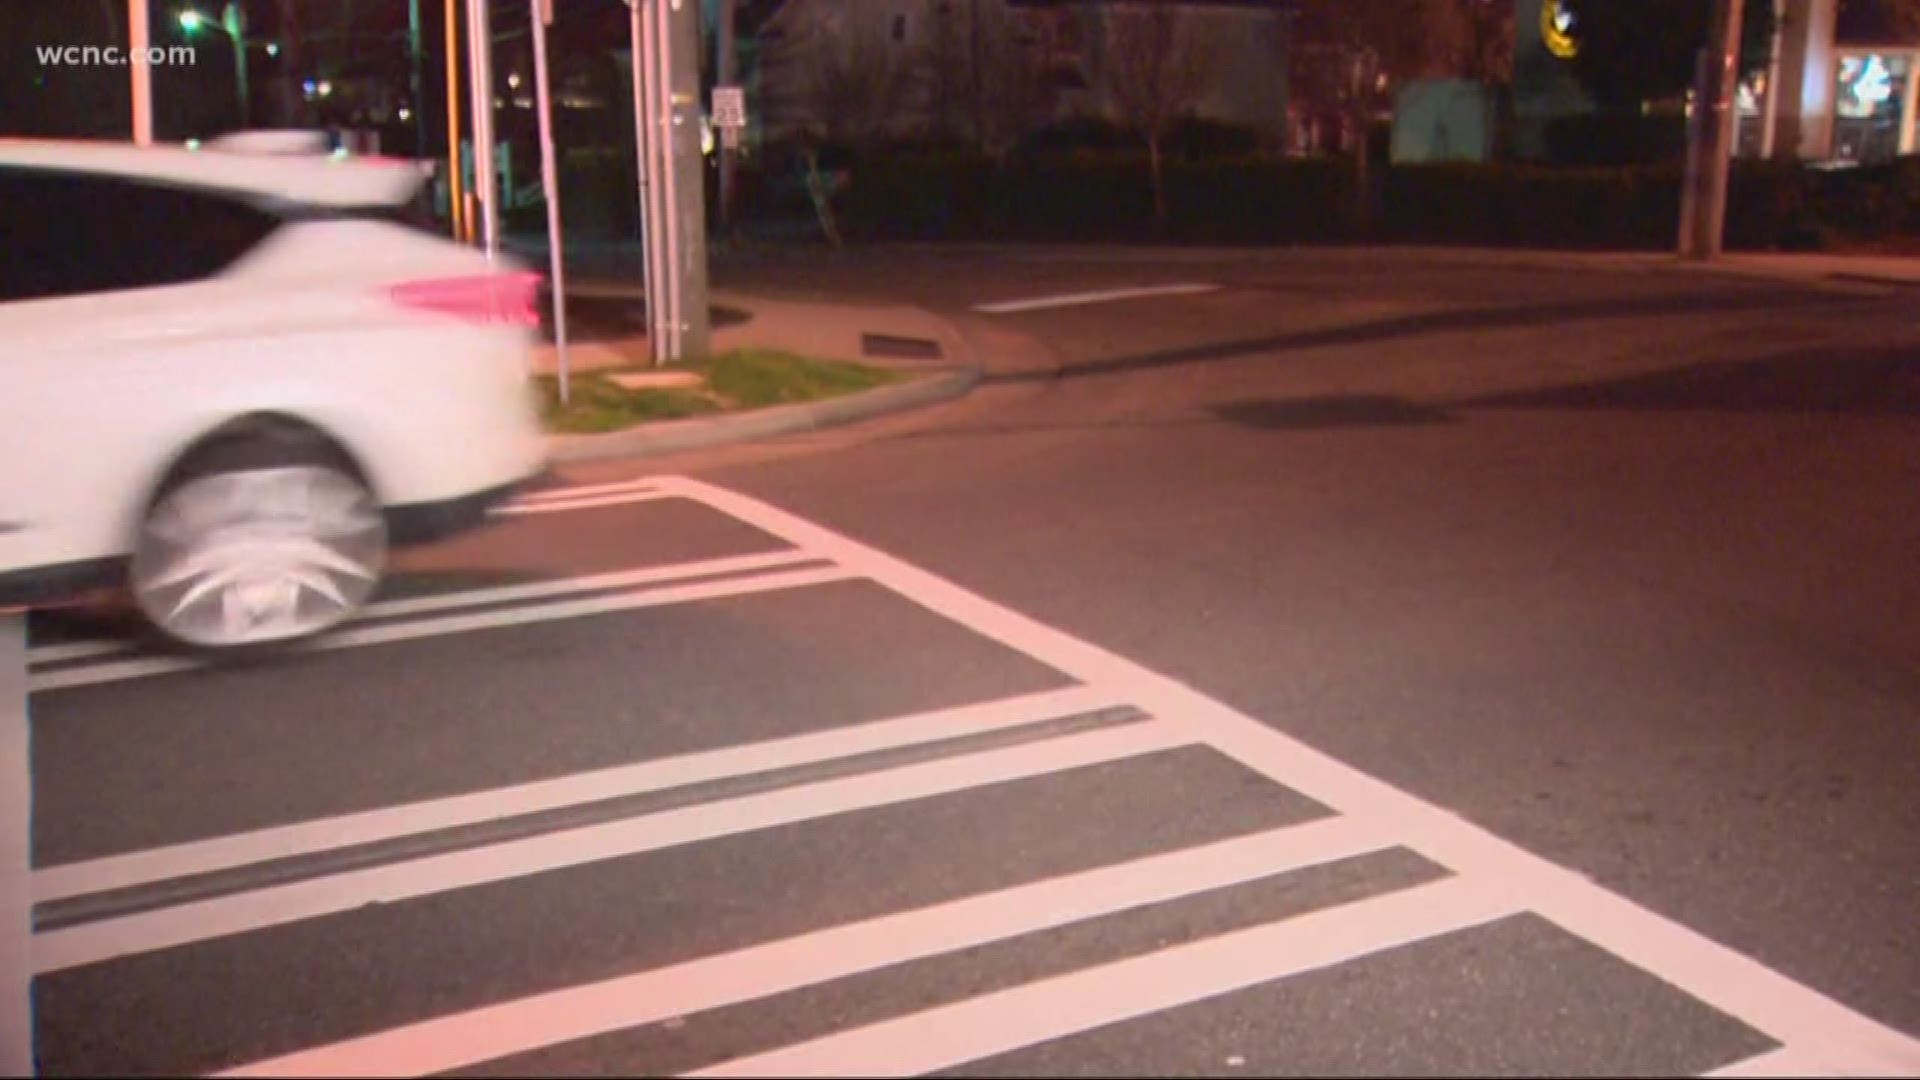 City Council talked about the Vision Zero plan, a package to add crosswalks and lower speed limits across Charlotte.